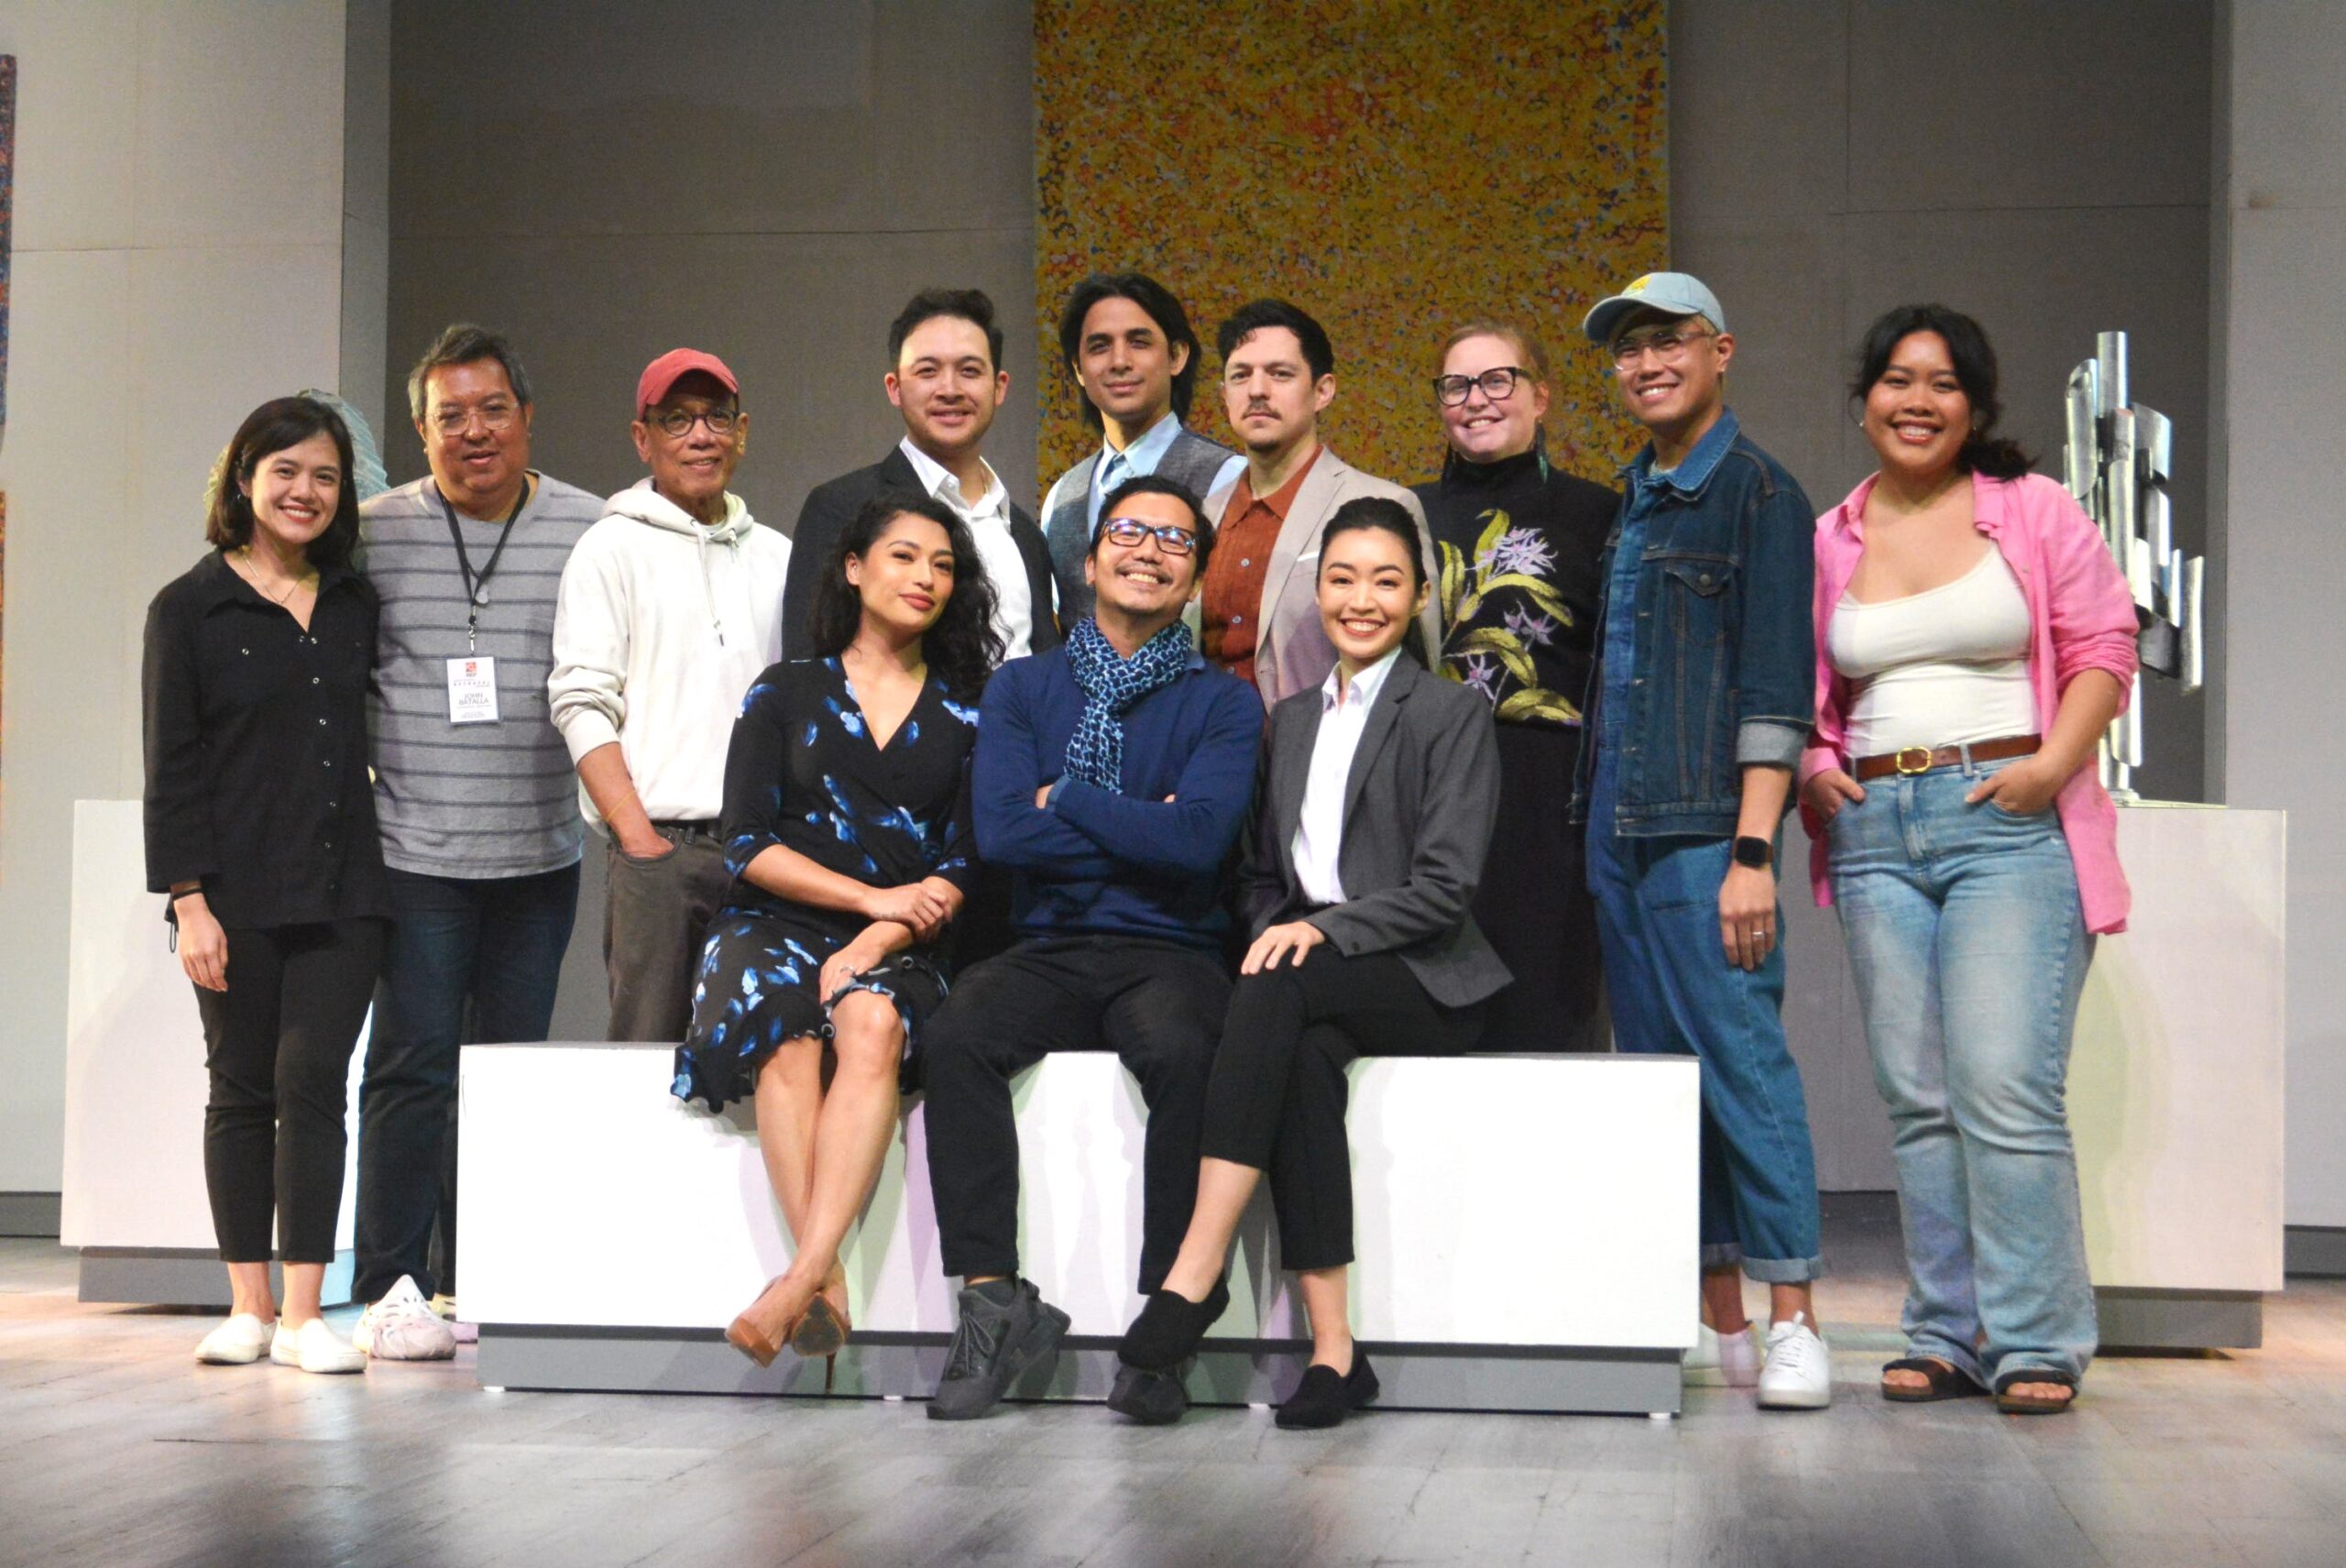 The cast and production team of “Betrayal” 